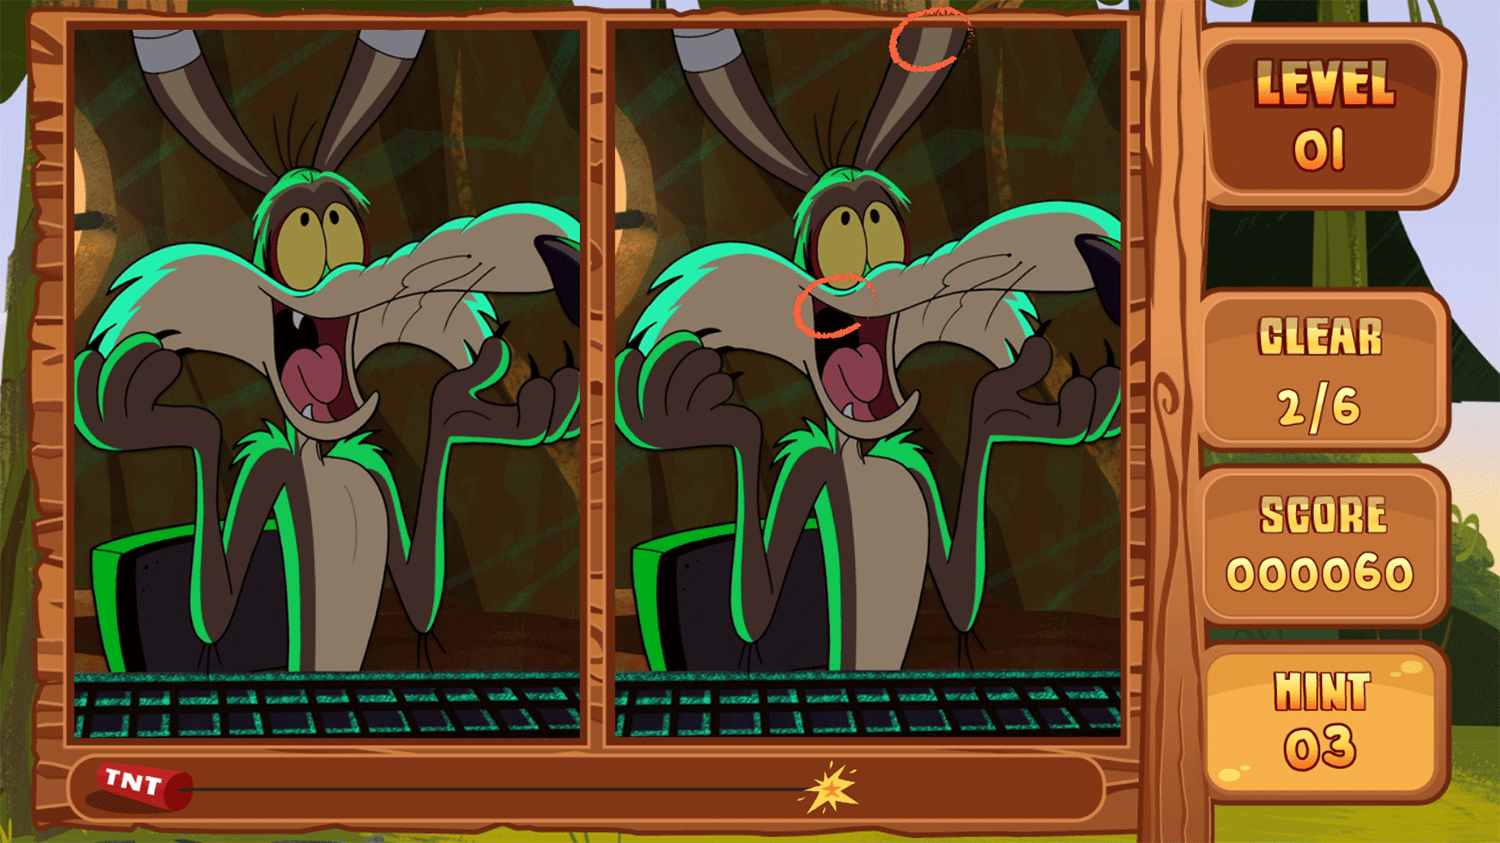 Bugs Bunny Spot the Difference Game Screenshot.